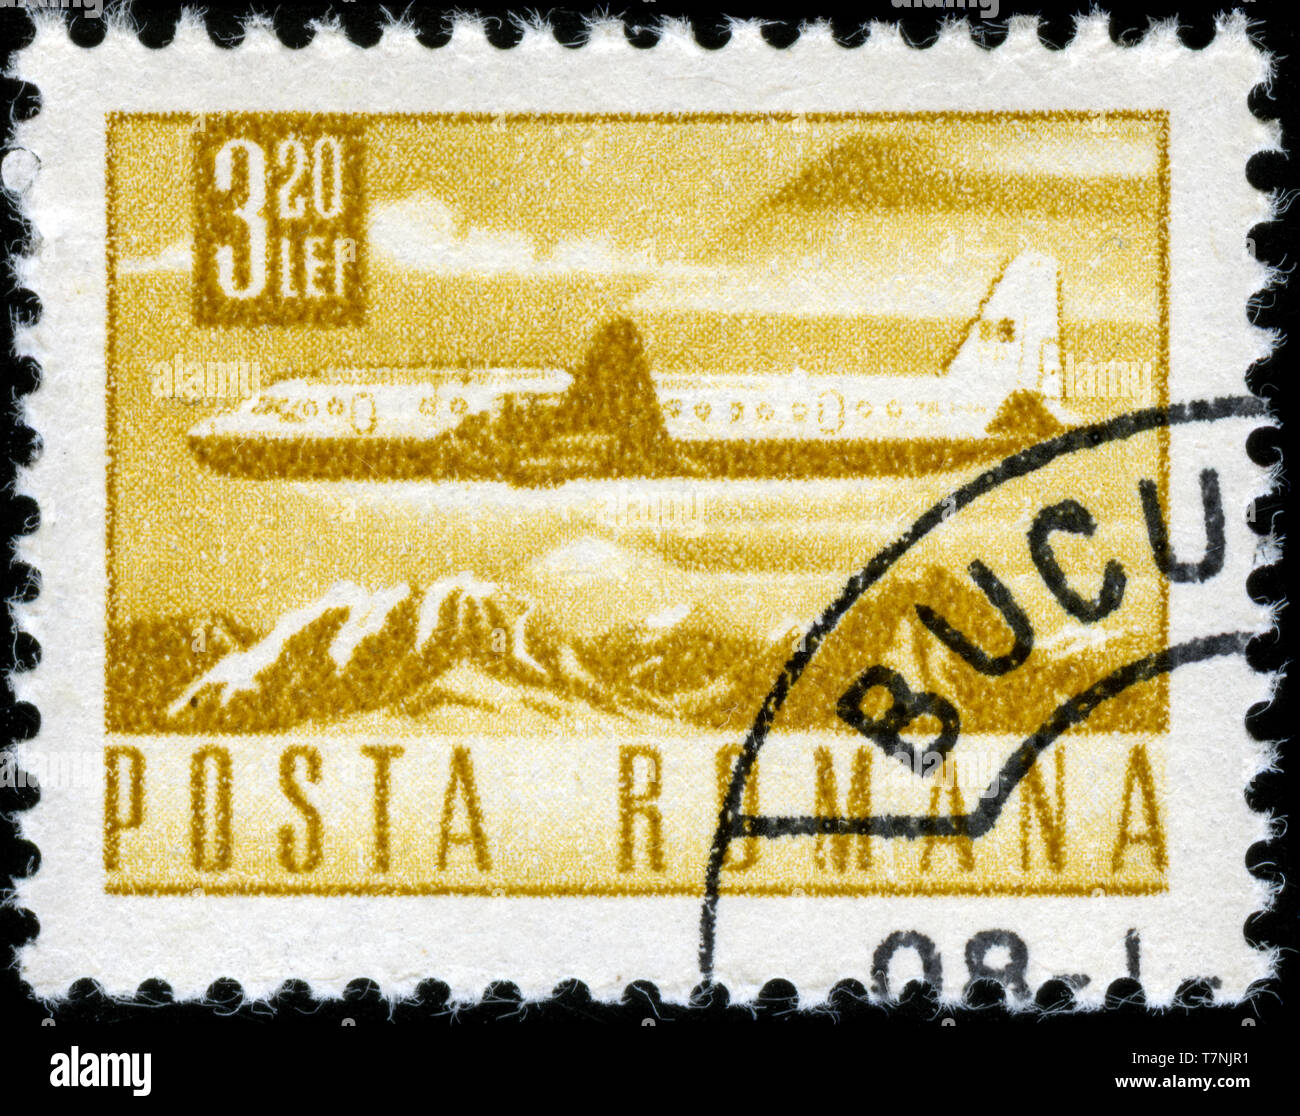 Postage stamp from Romania in the Postal and Transport series issued in 1971 Stock Photo